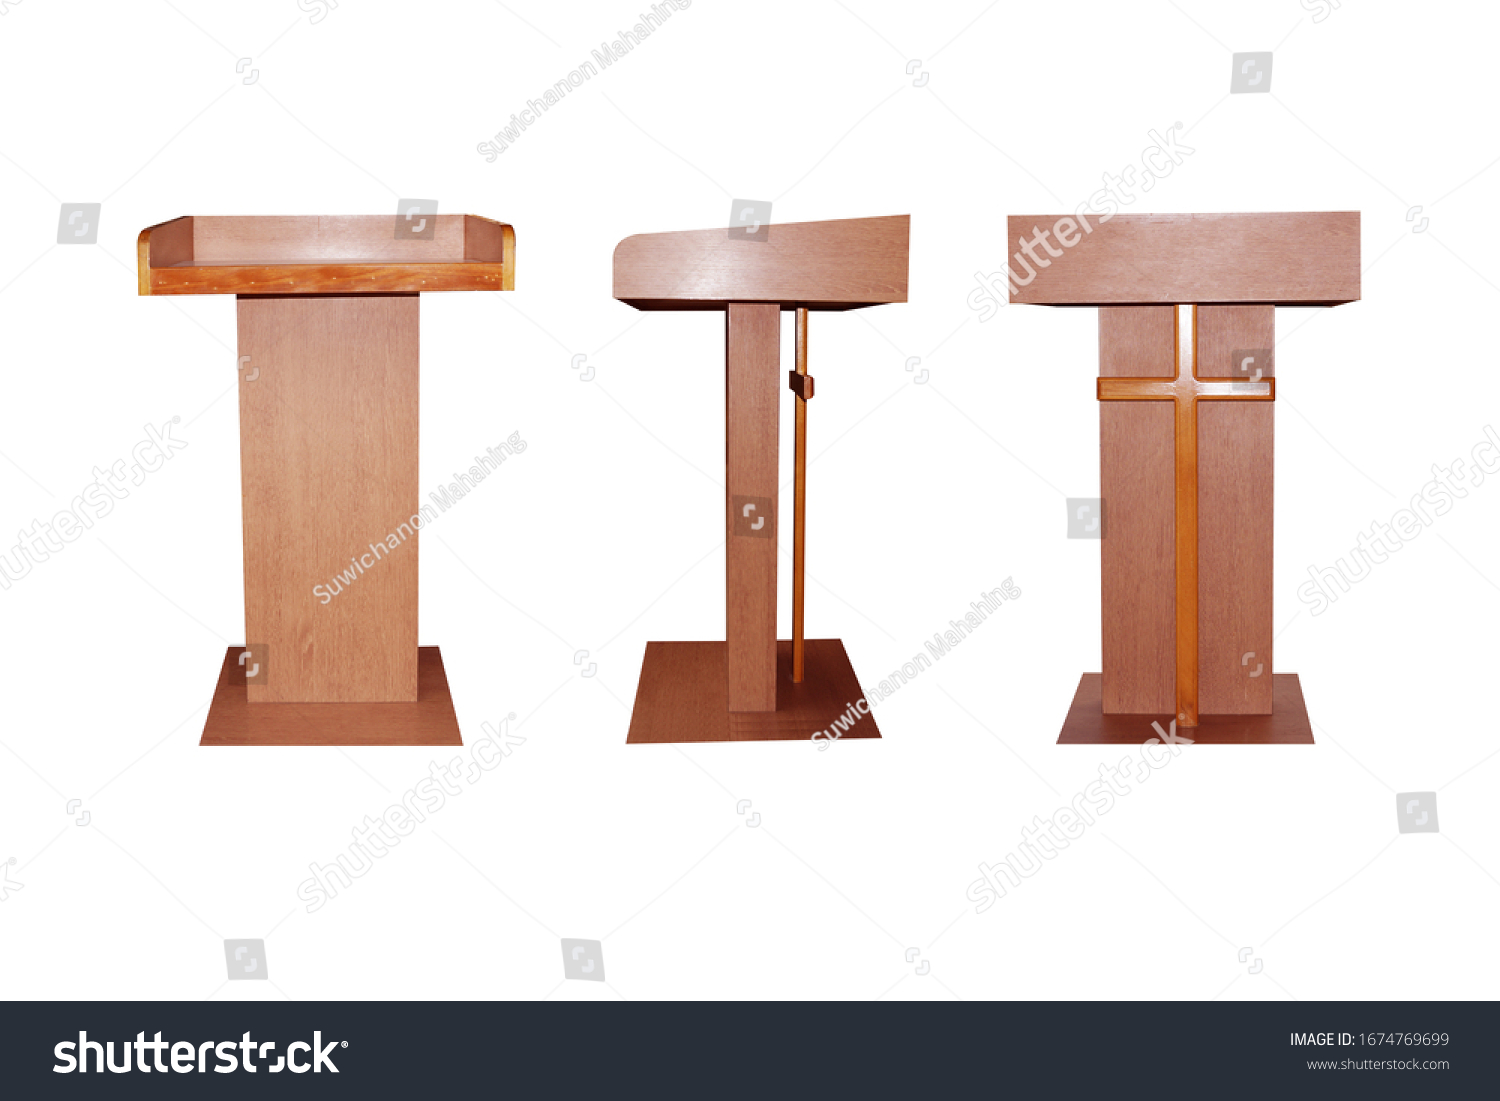 Pulpit made by wood on white background #1674769699